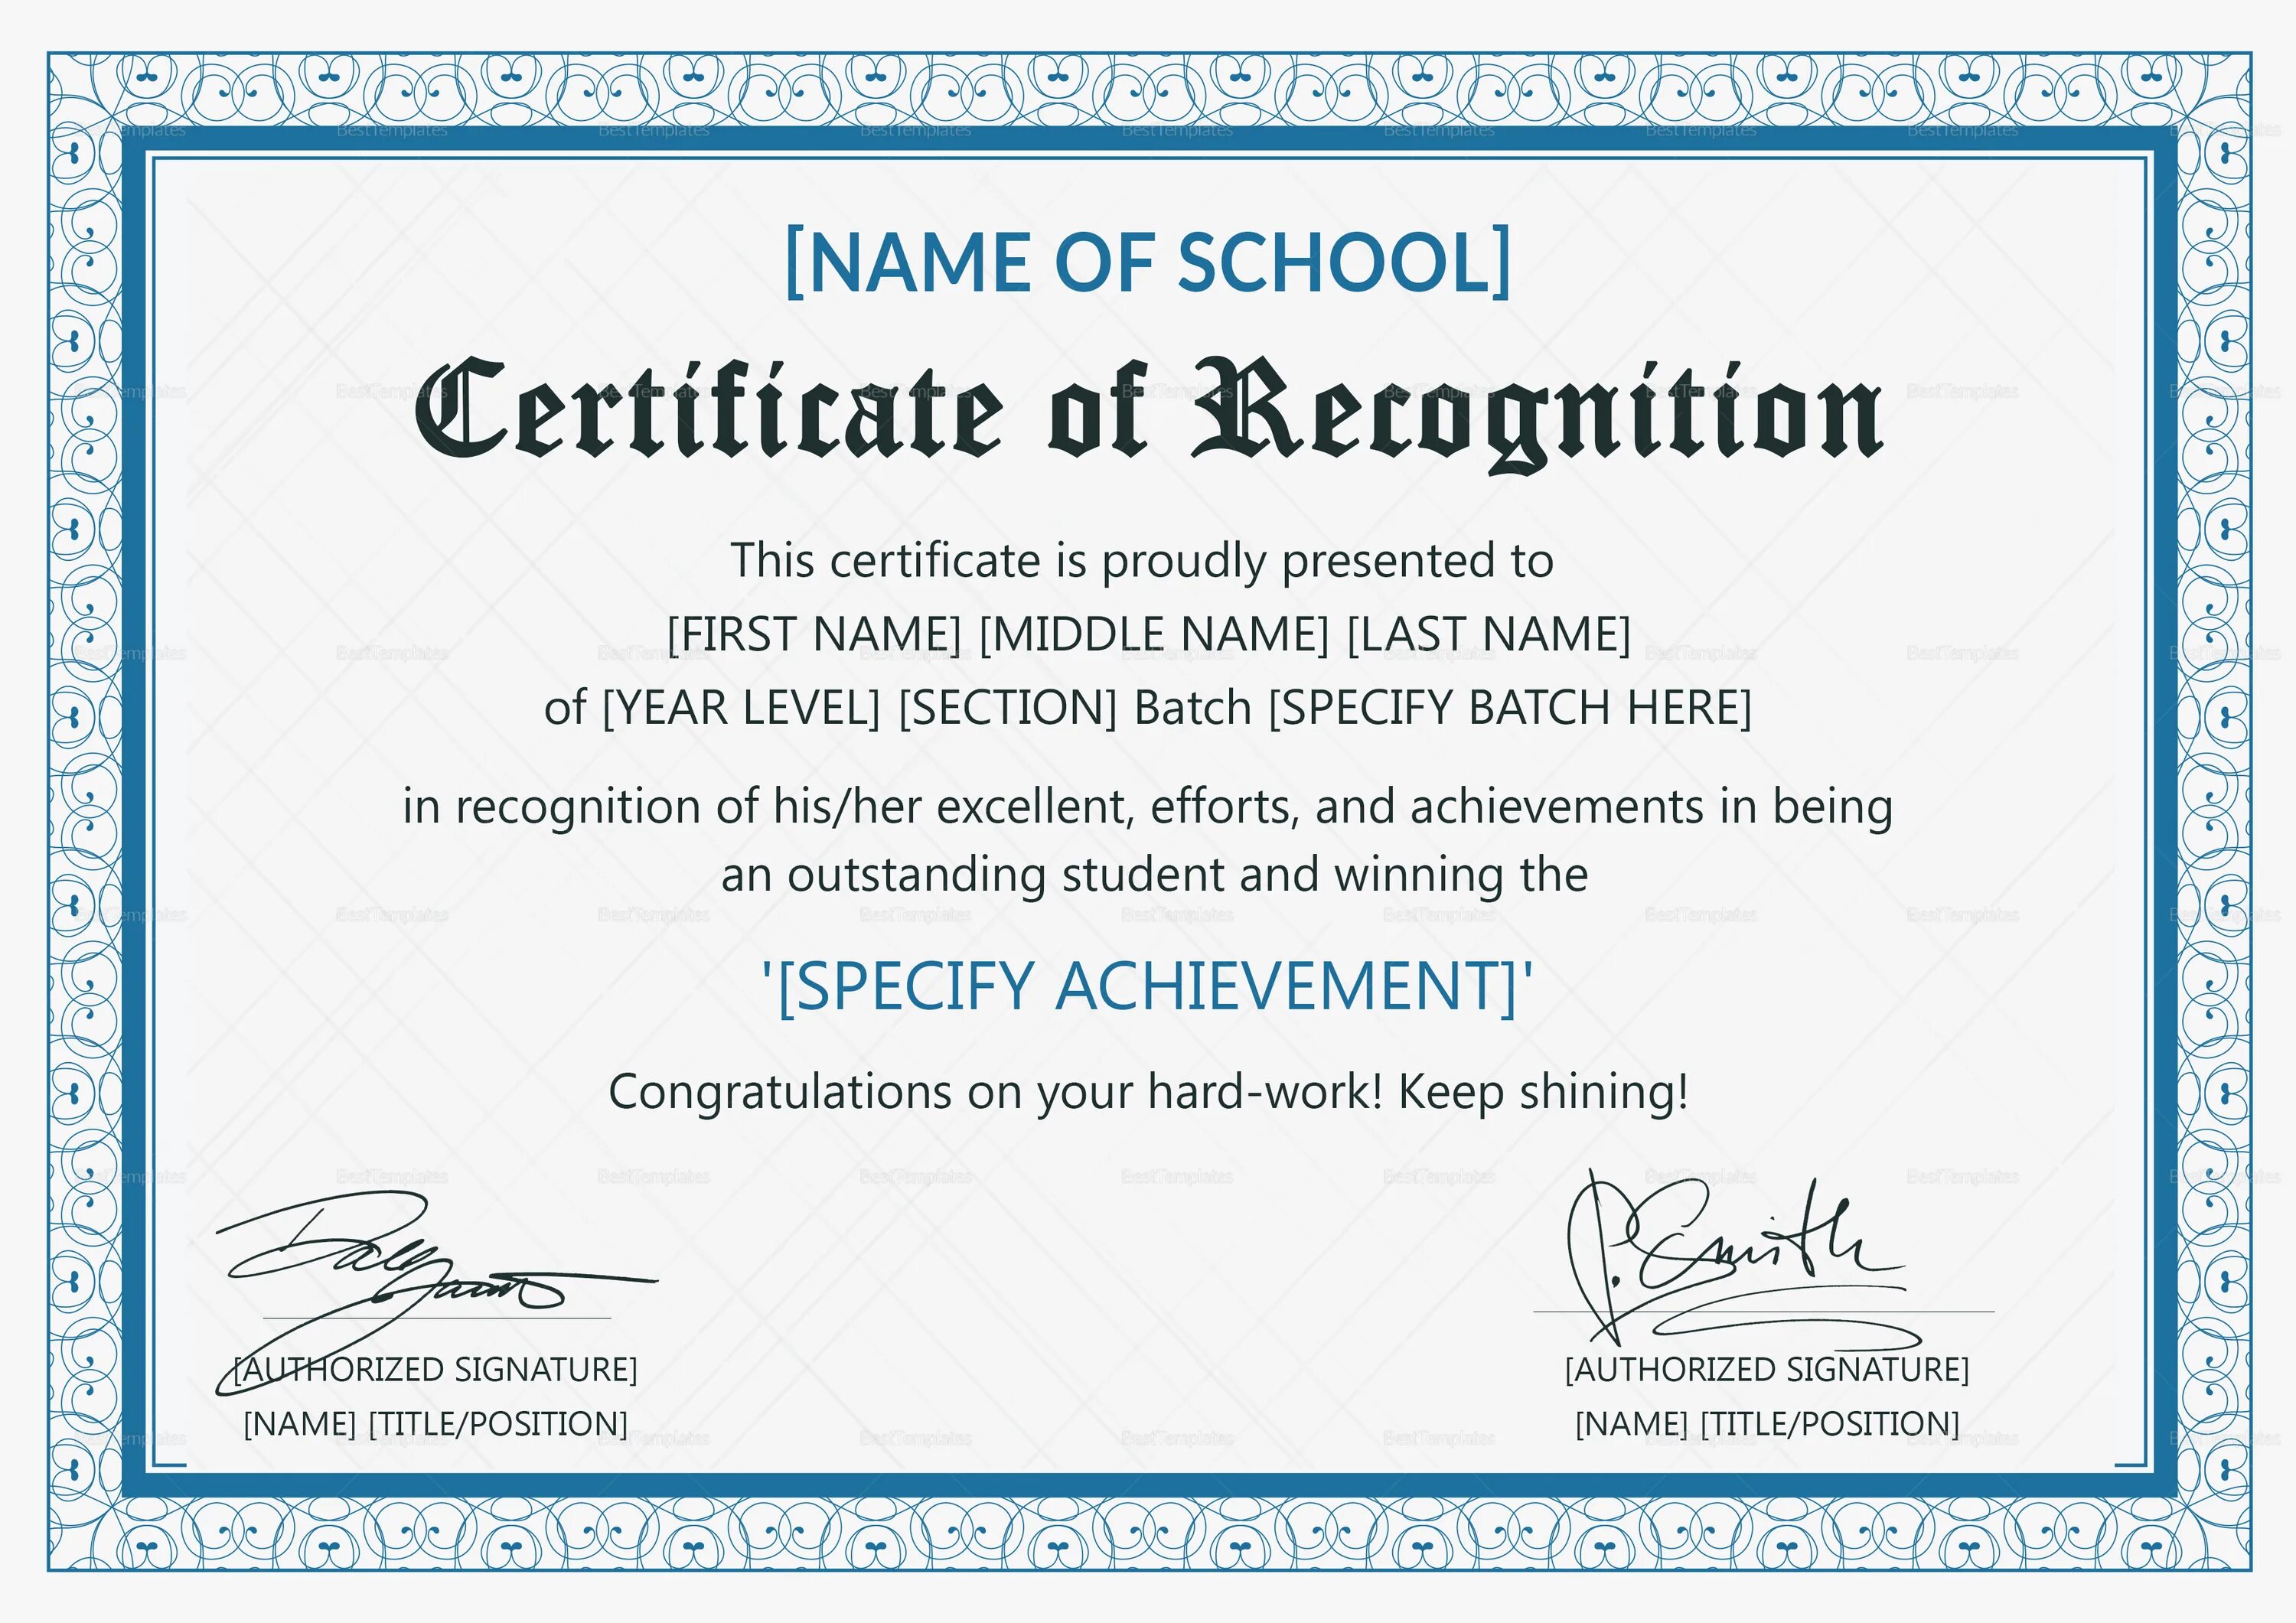 Certificate of recognition. Certificate for students. Certificate of recognition Sample.